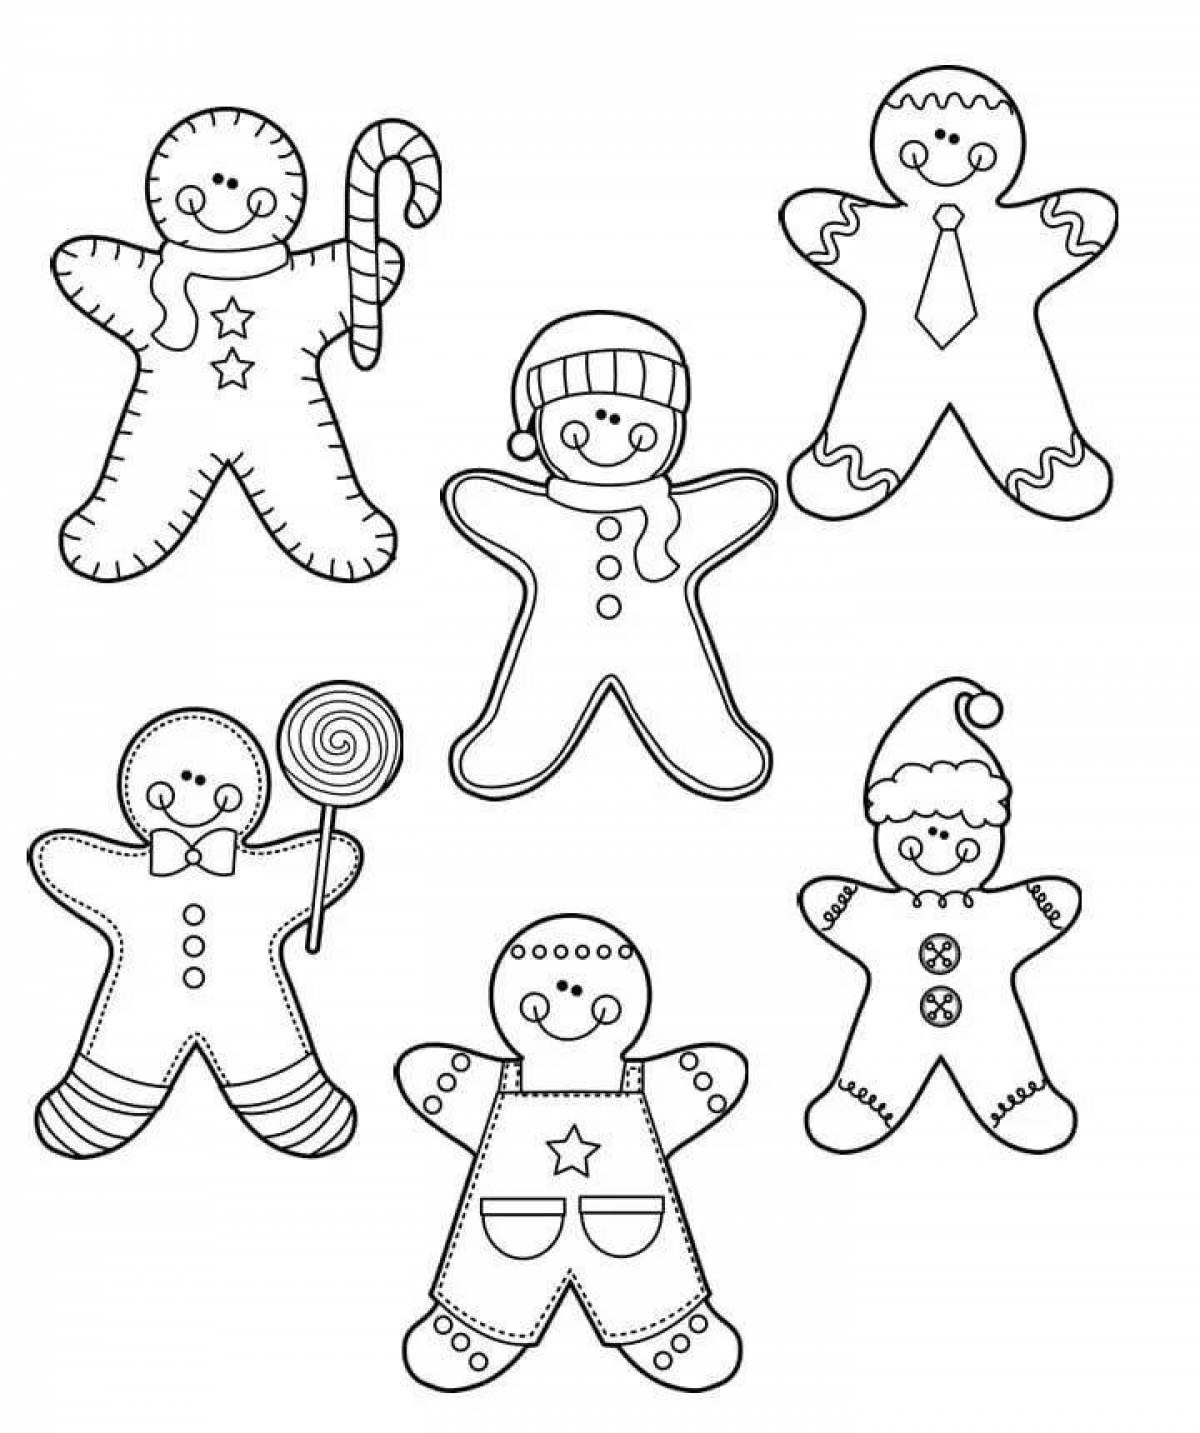 Rampant gingerbread coloring page